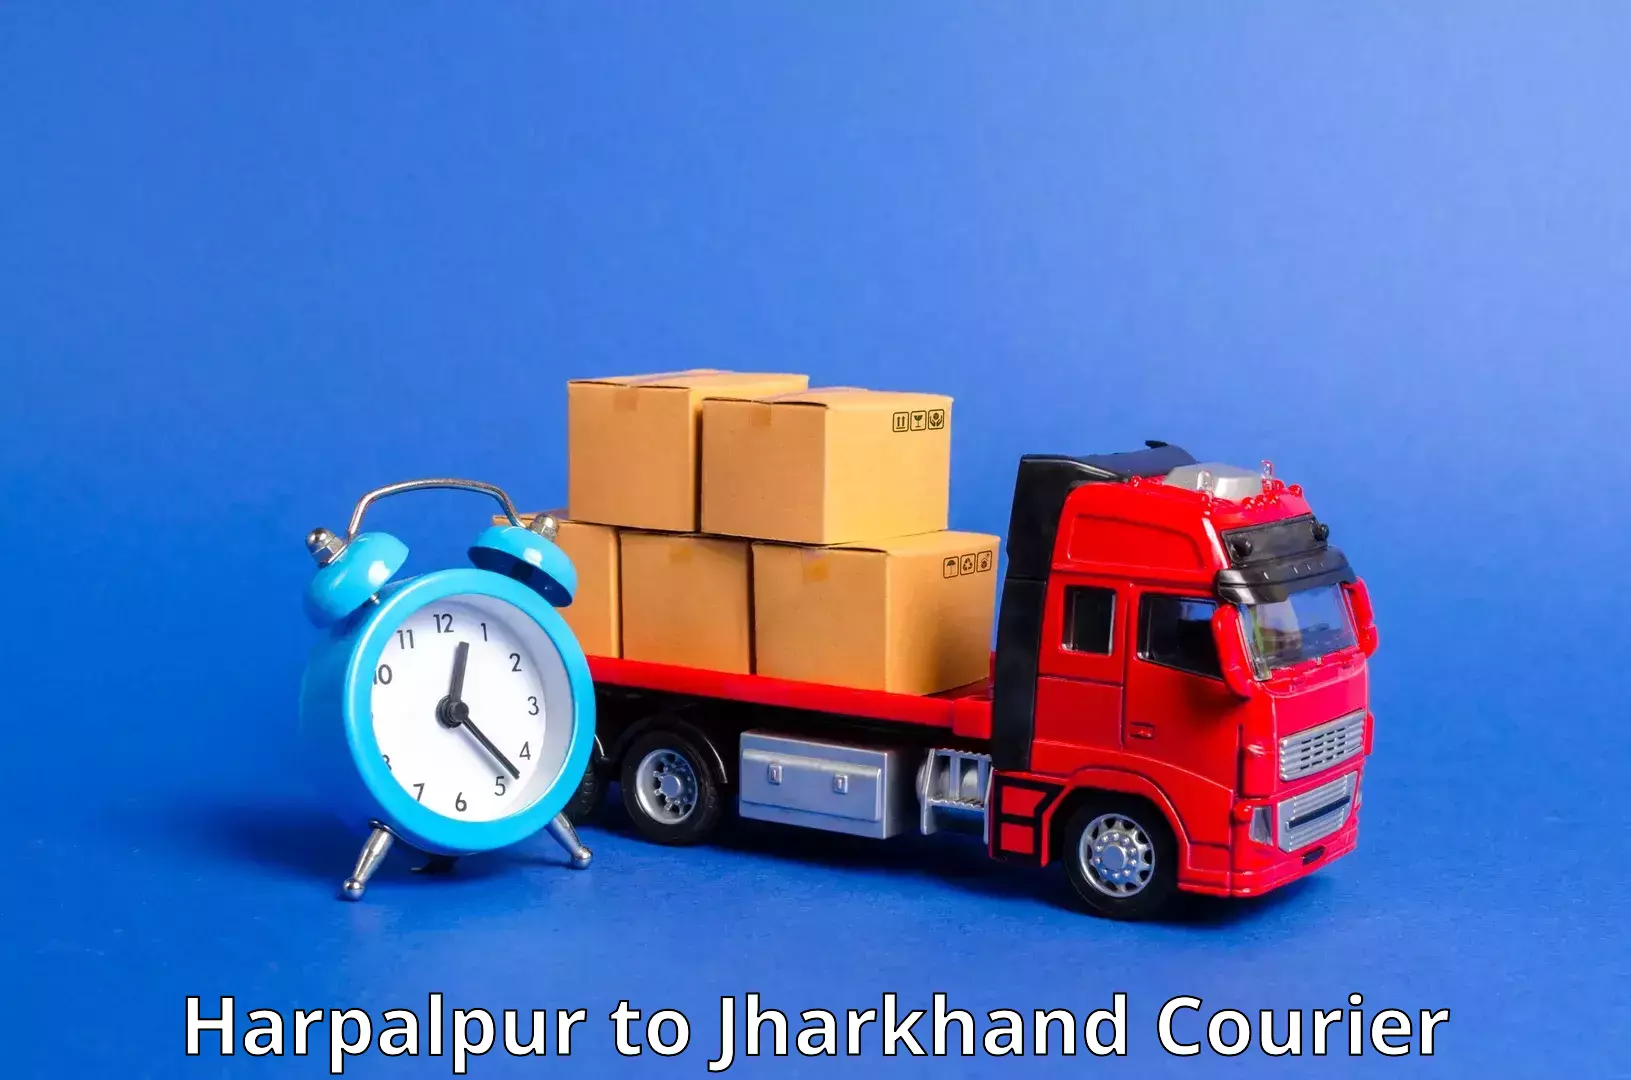 Courier services in Harpalpur to Bokaro